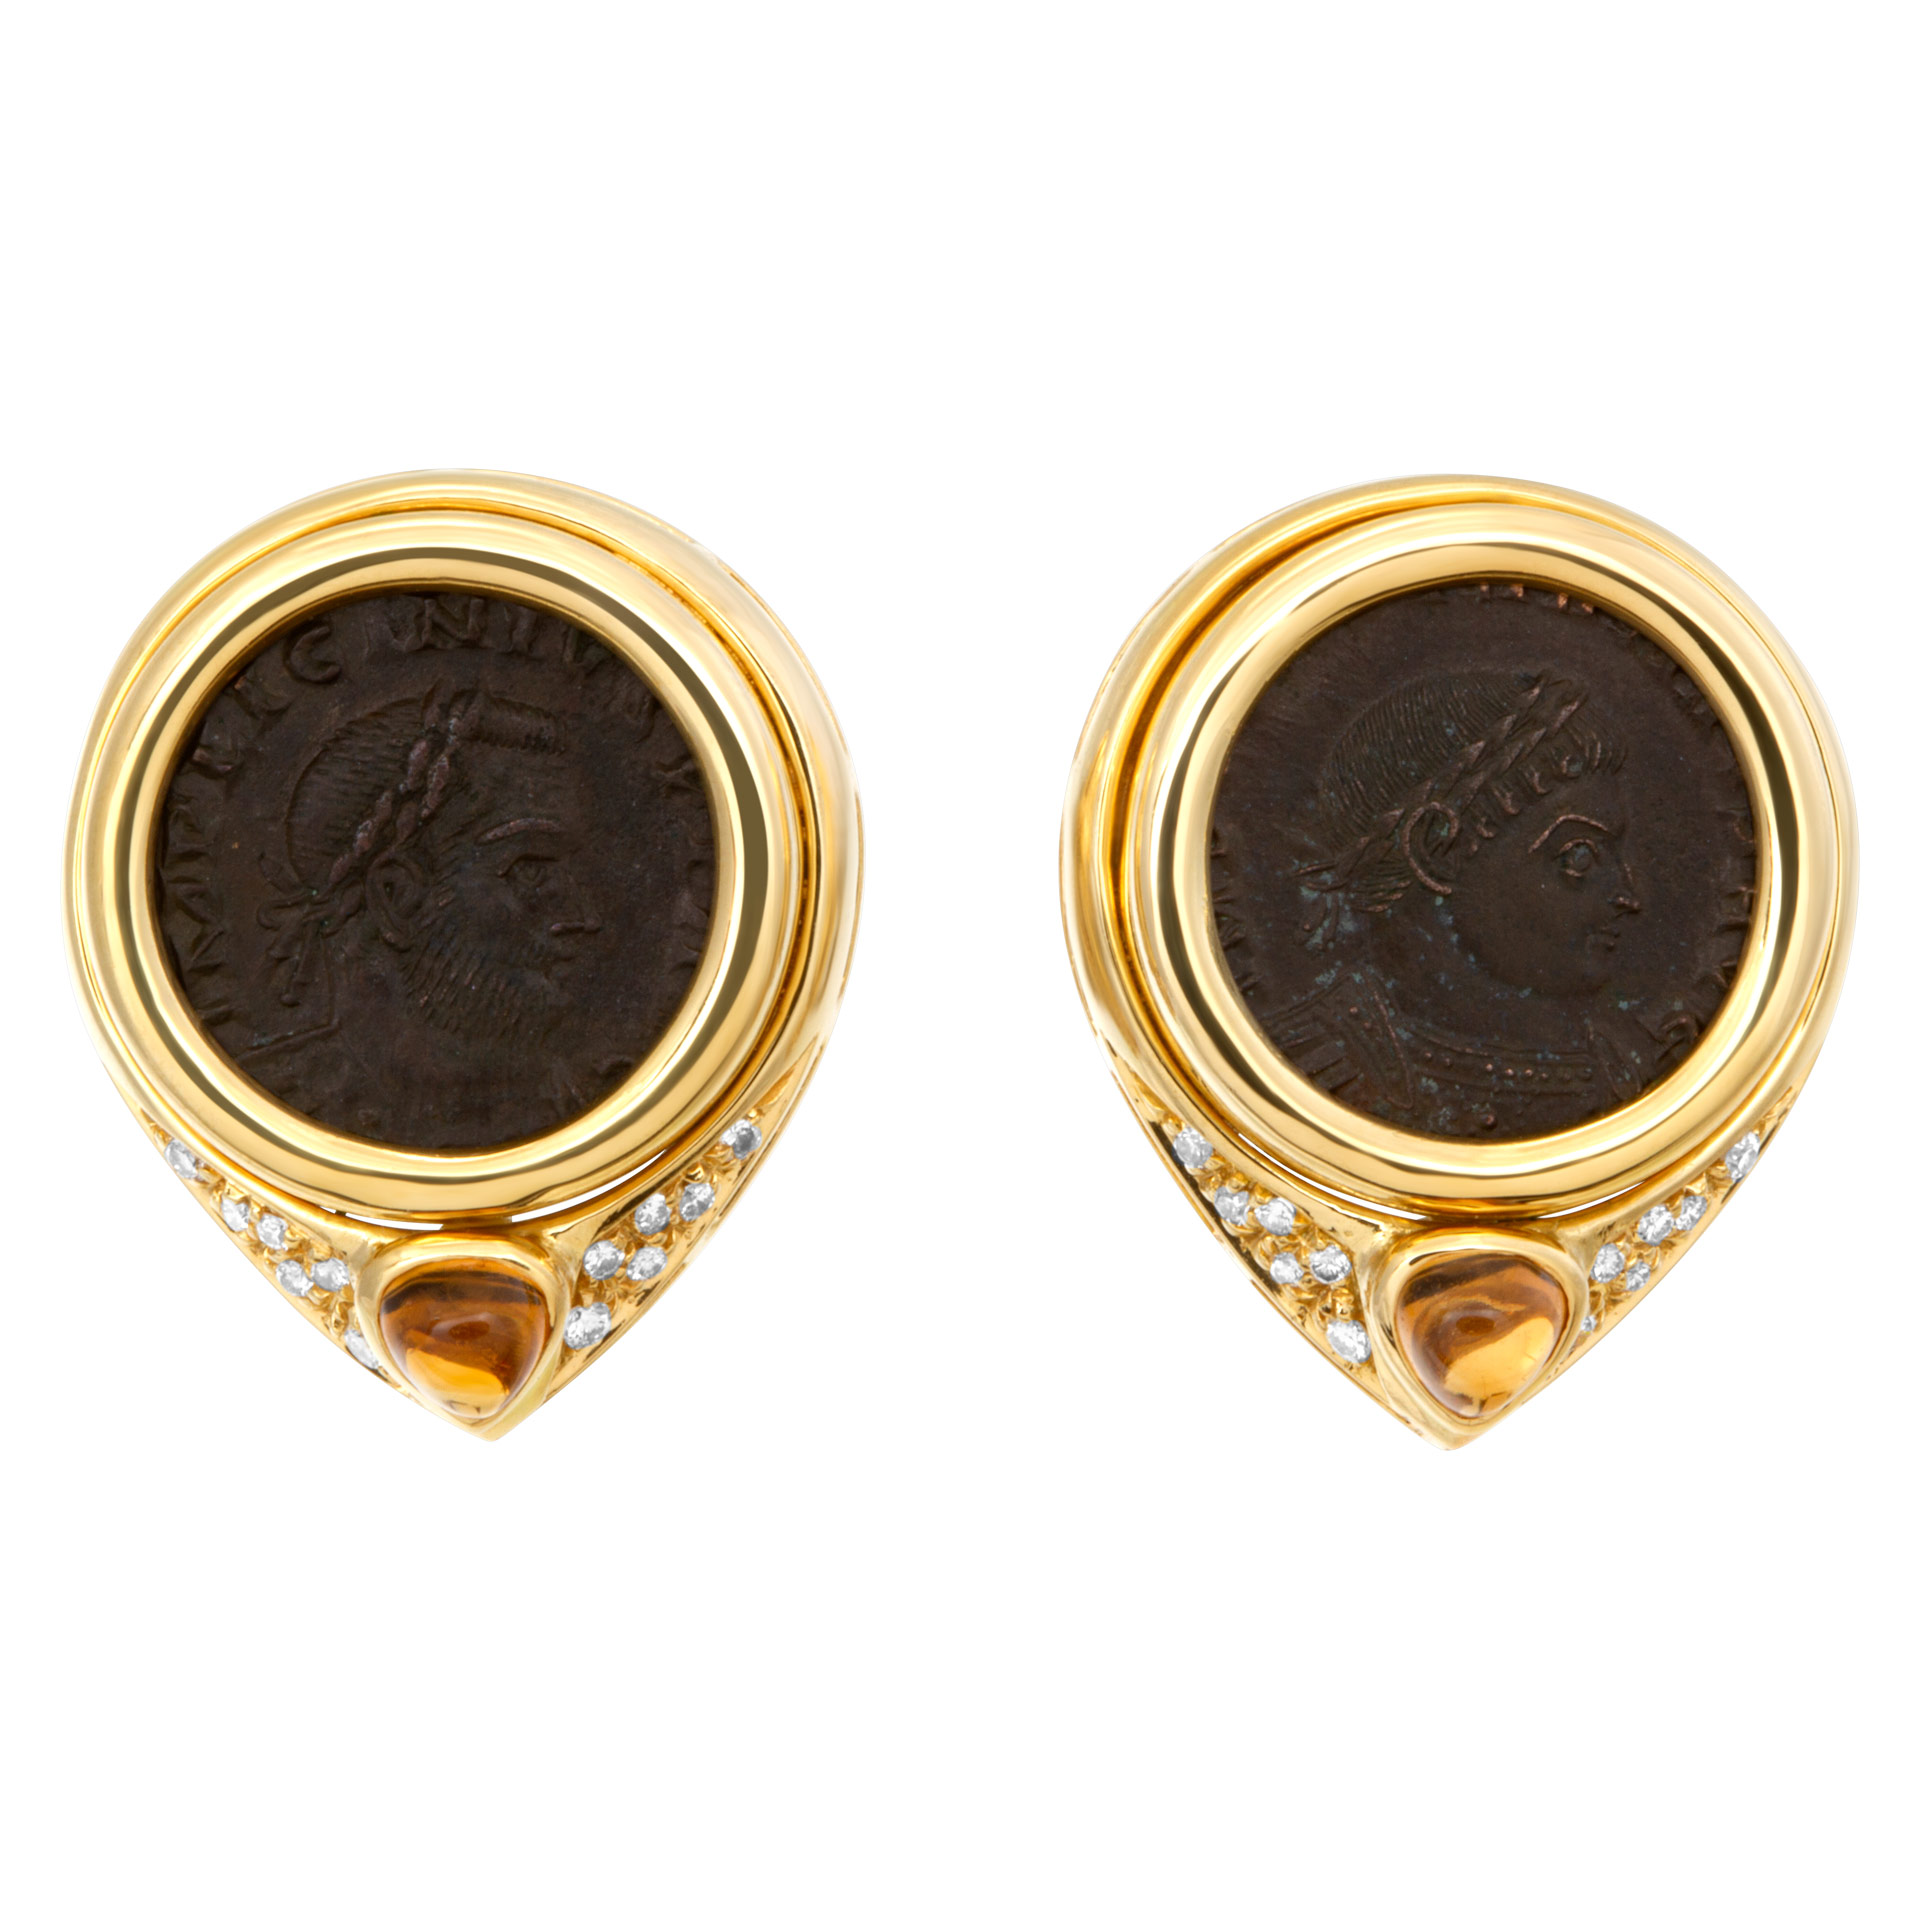 Ancient coin earrings in 18k with diamonds and citrines cabochon